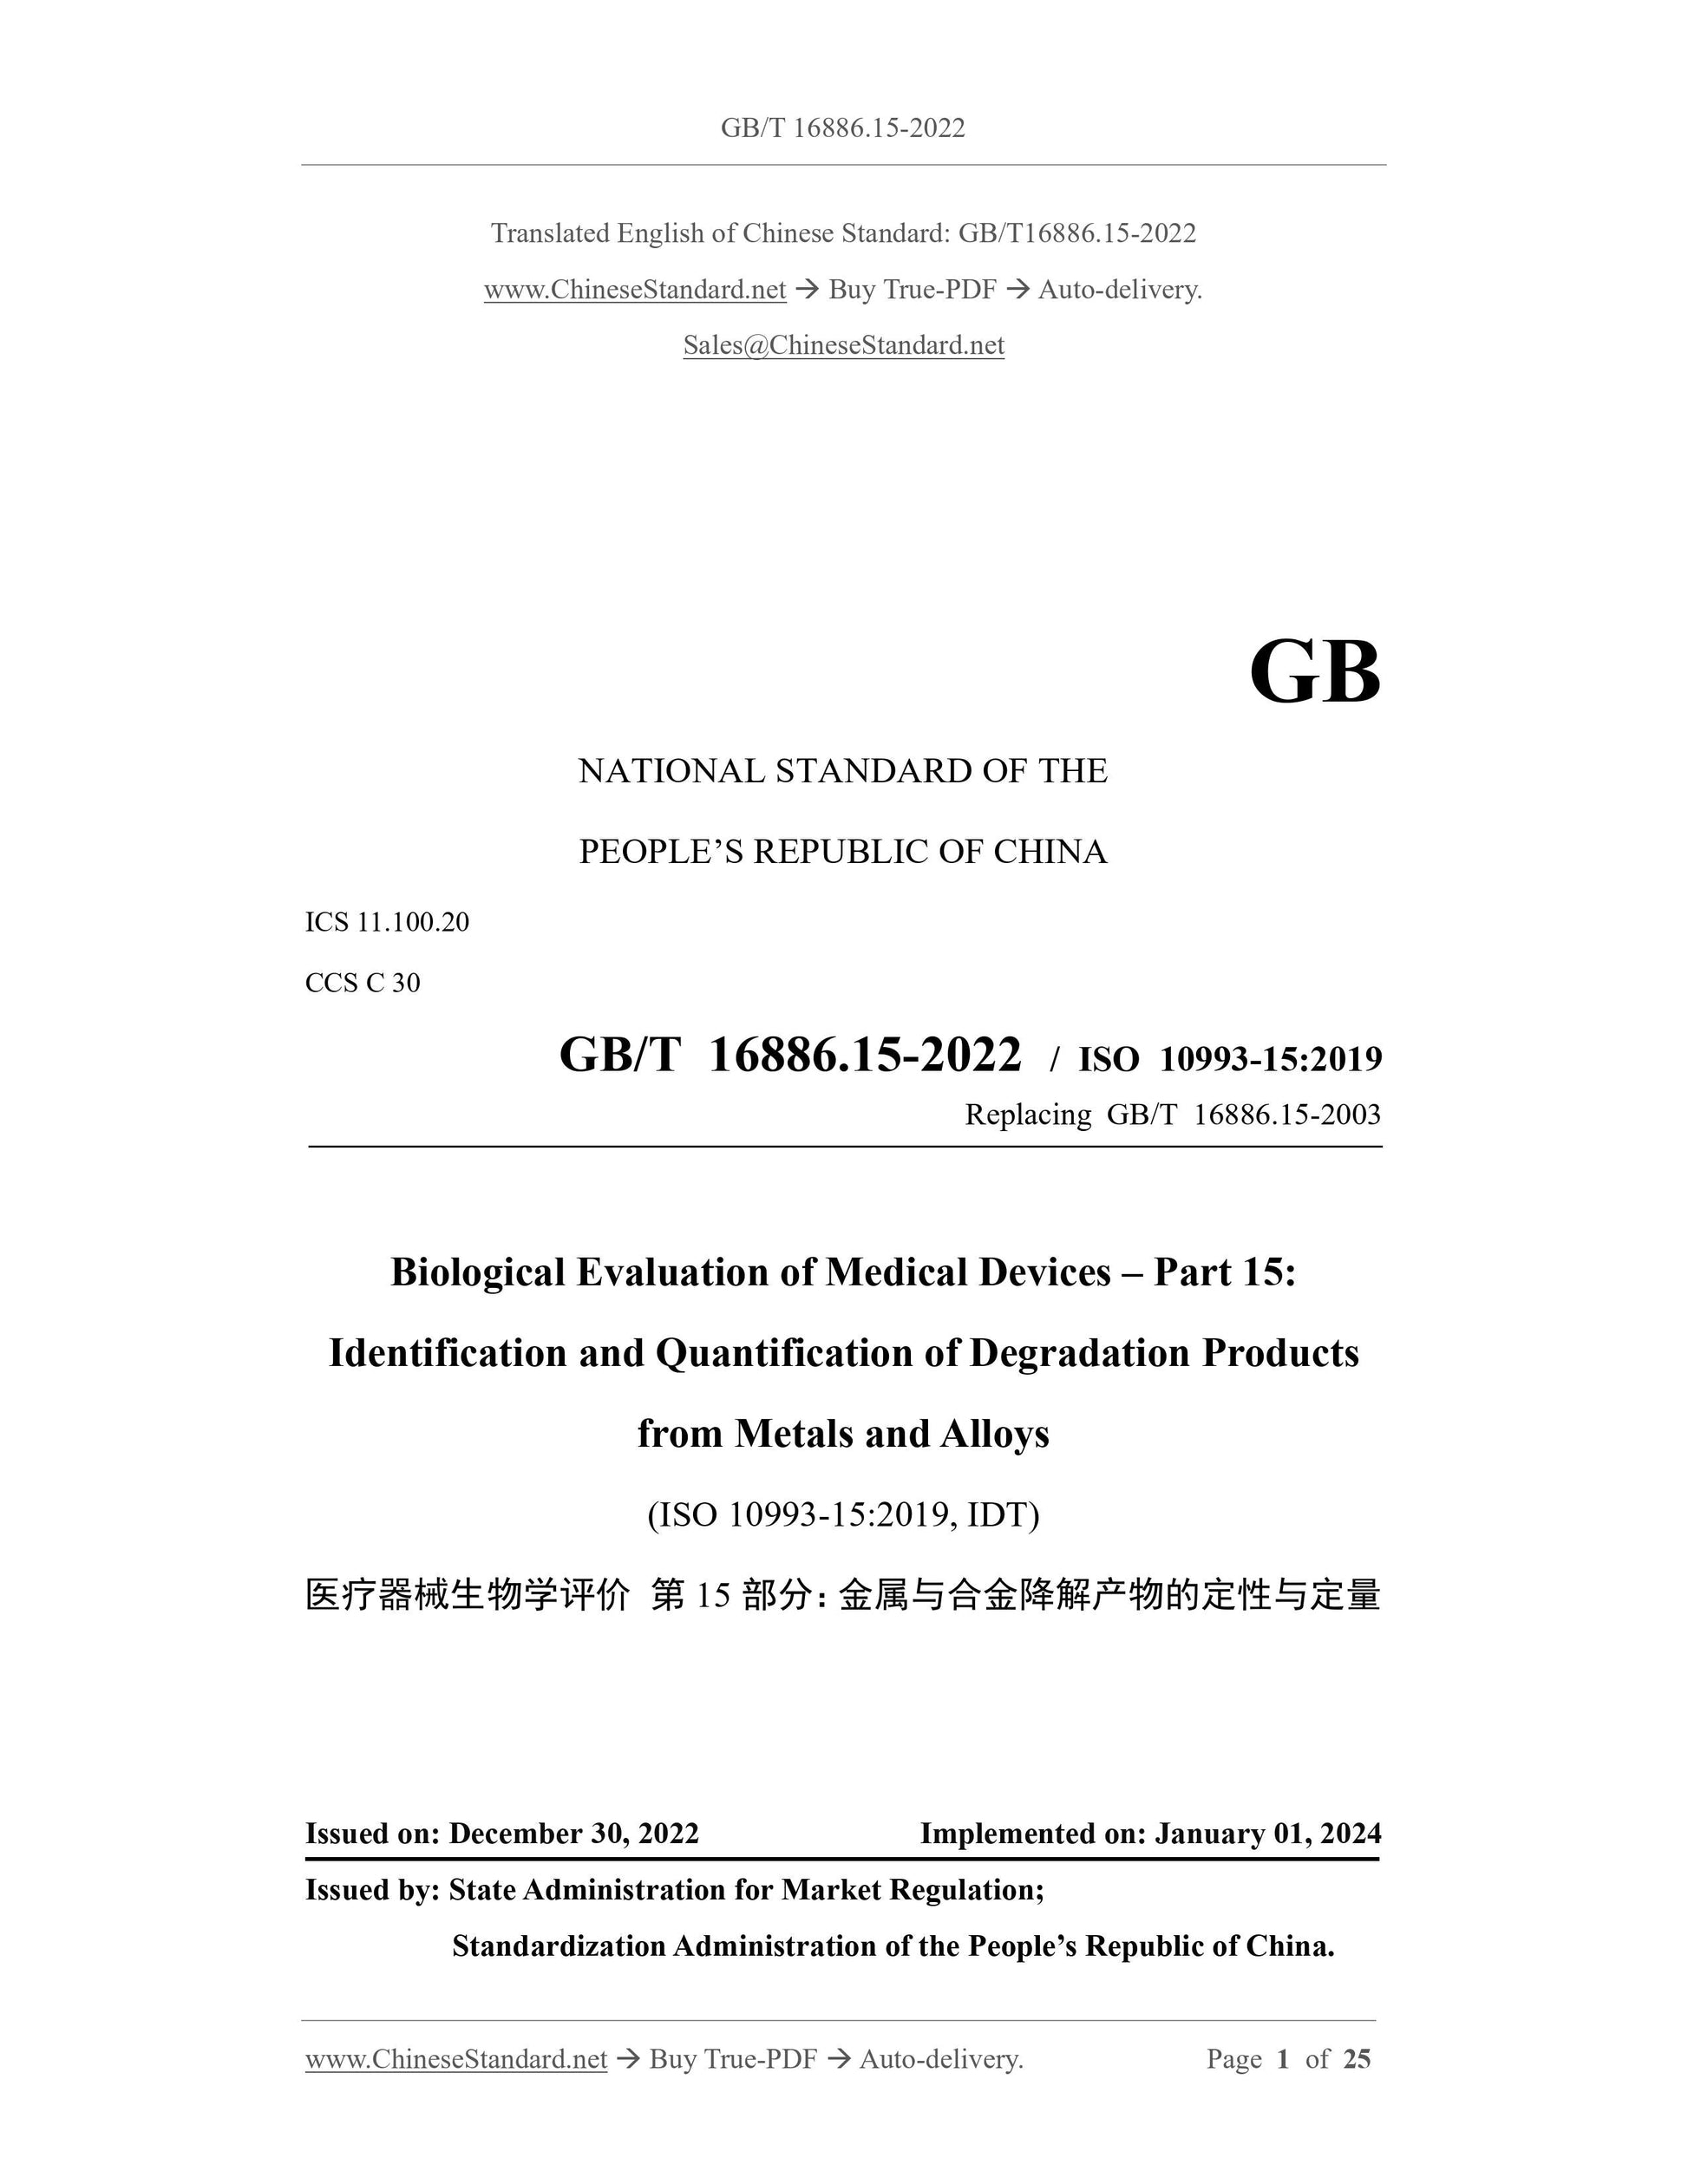 GB/T 16886.15-2022 Page 1